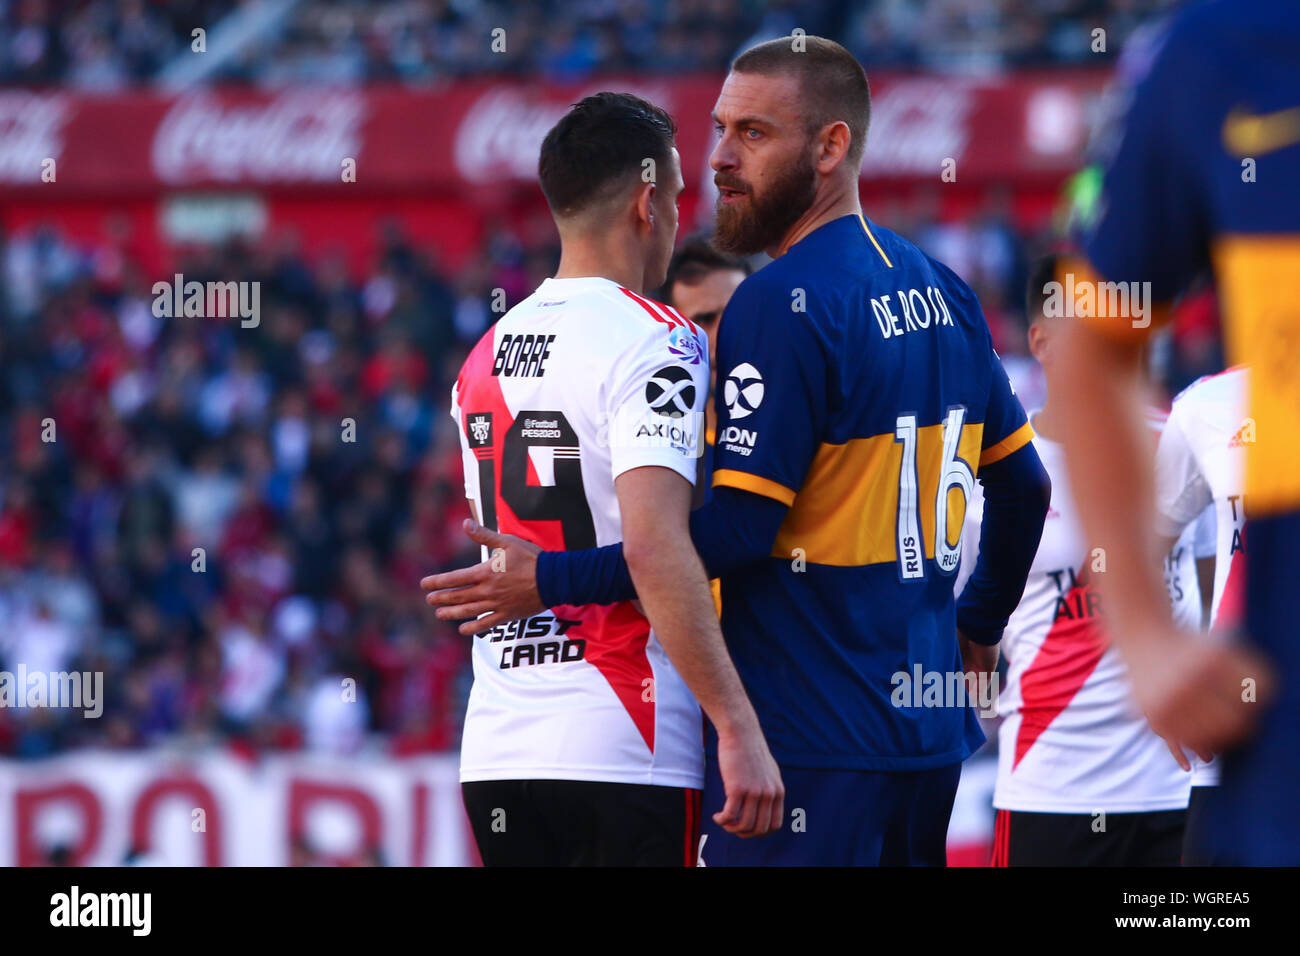 BUENOS AIRES, 01.09.2019: Daniele De Rossi during the derby between River Plate and Boca Juniors for match of Superliga Argentina on Monumental Stadiu Stock Photo